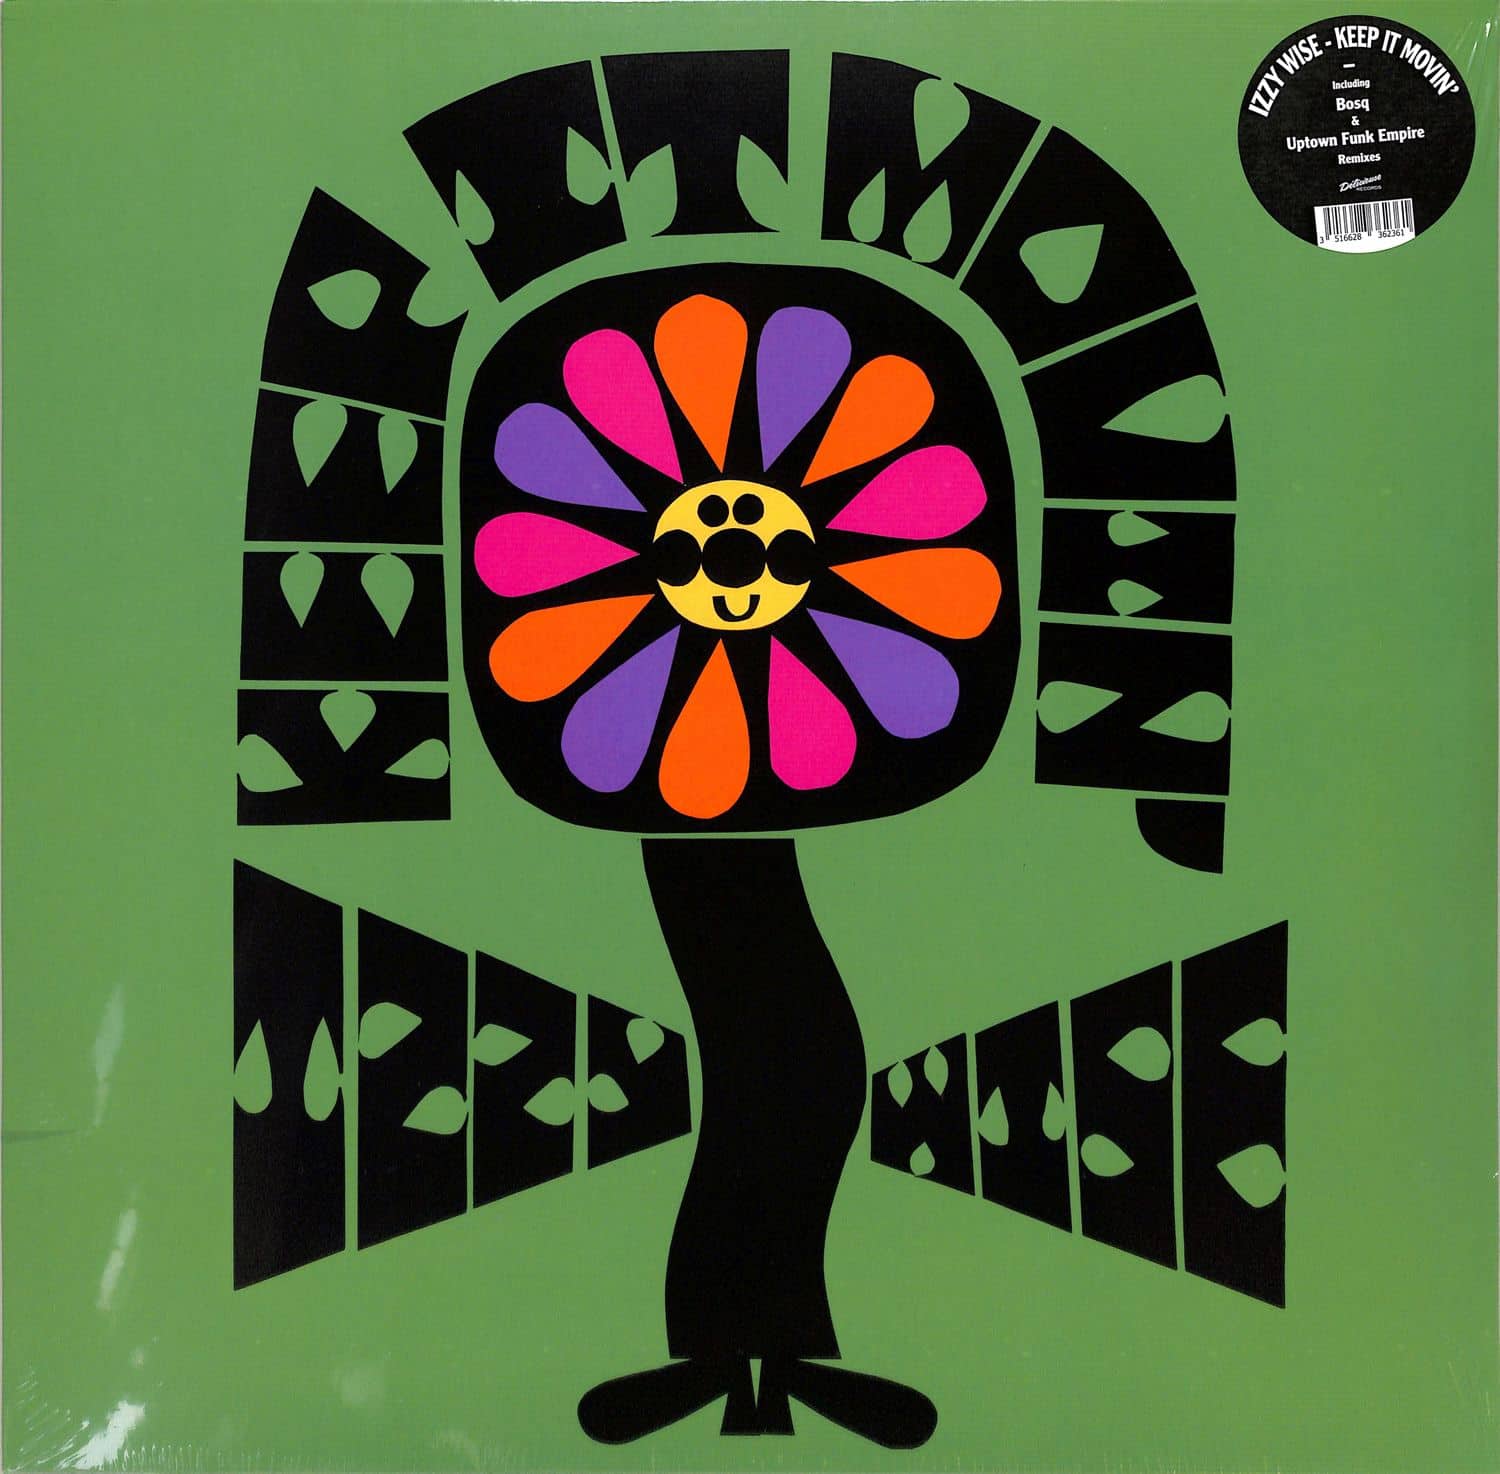 Izzy Wise - KEEP IT MOVIN EP